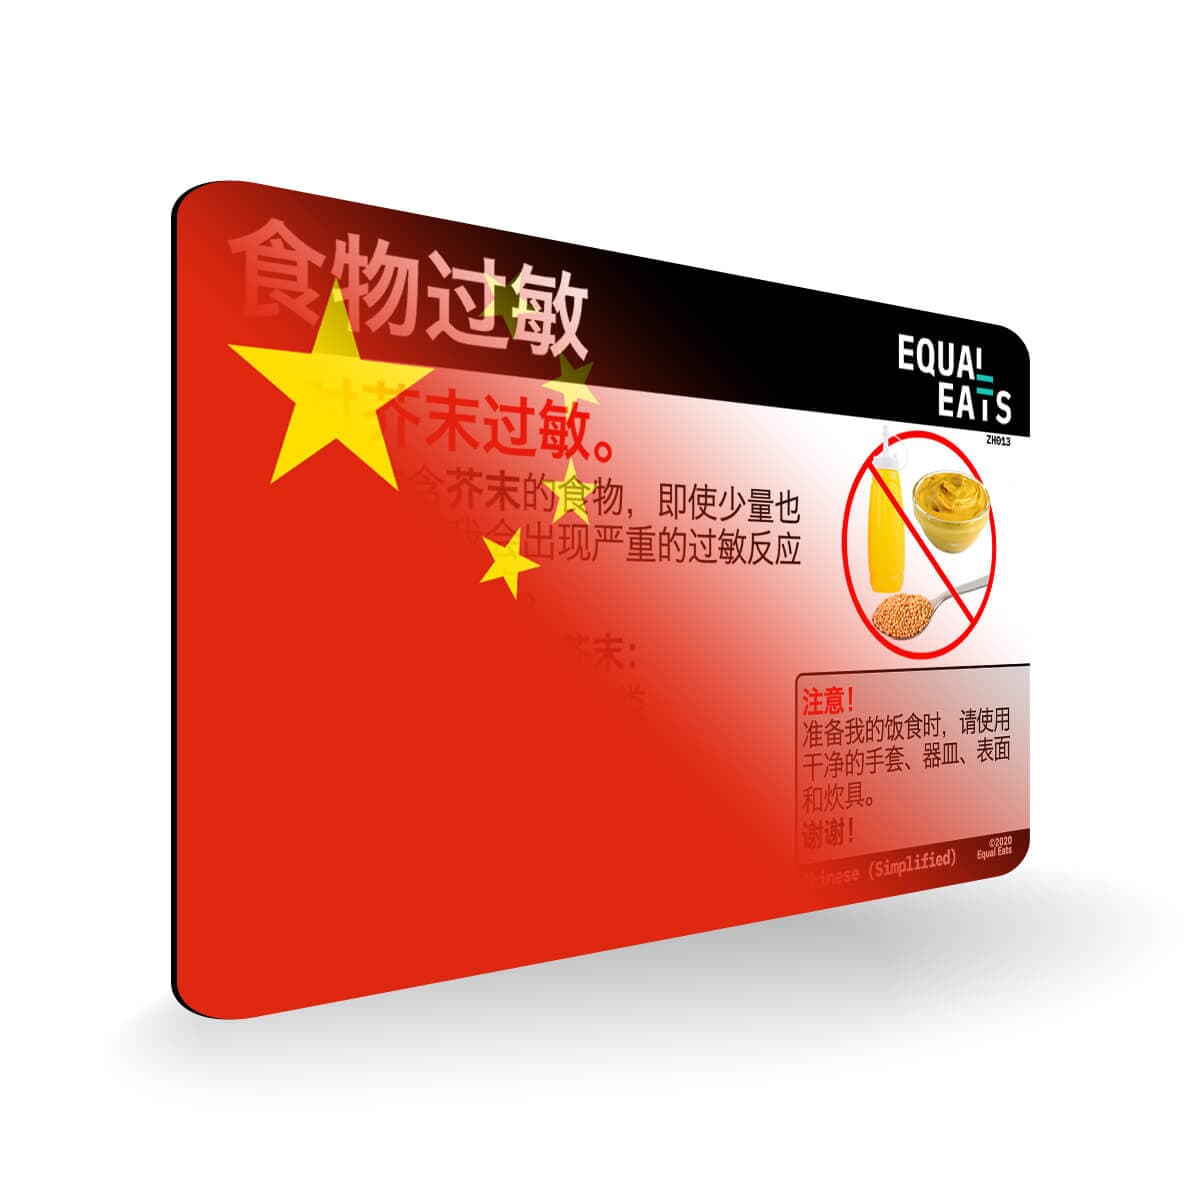 Mustard Allergy in Simplified Chinese. Mustard Allergy Card for China